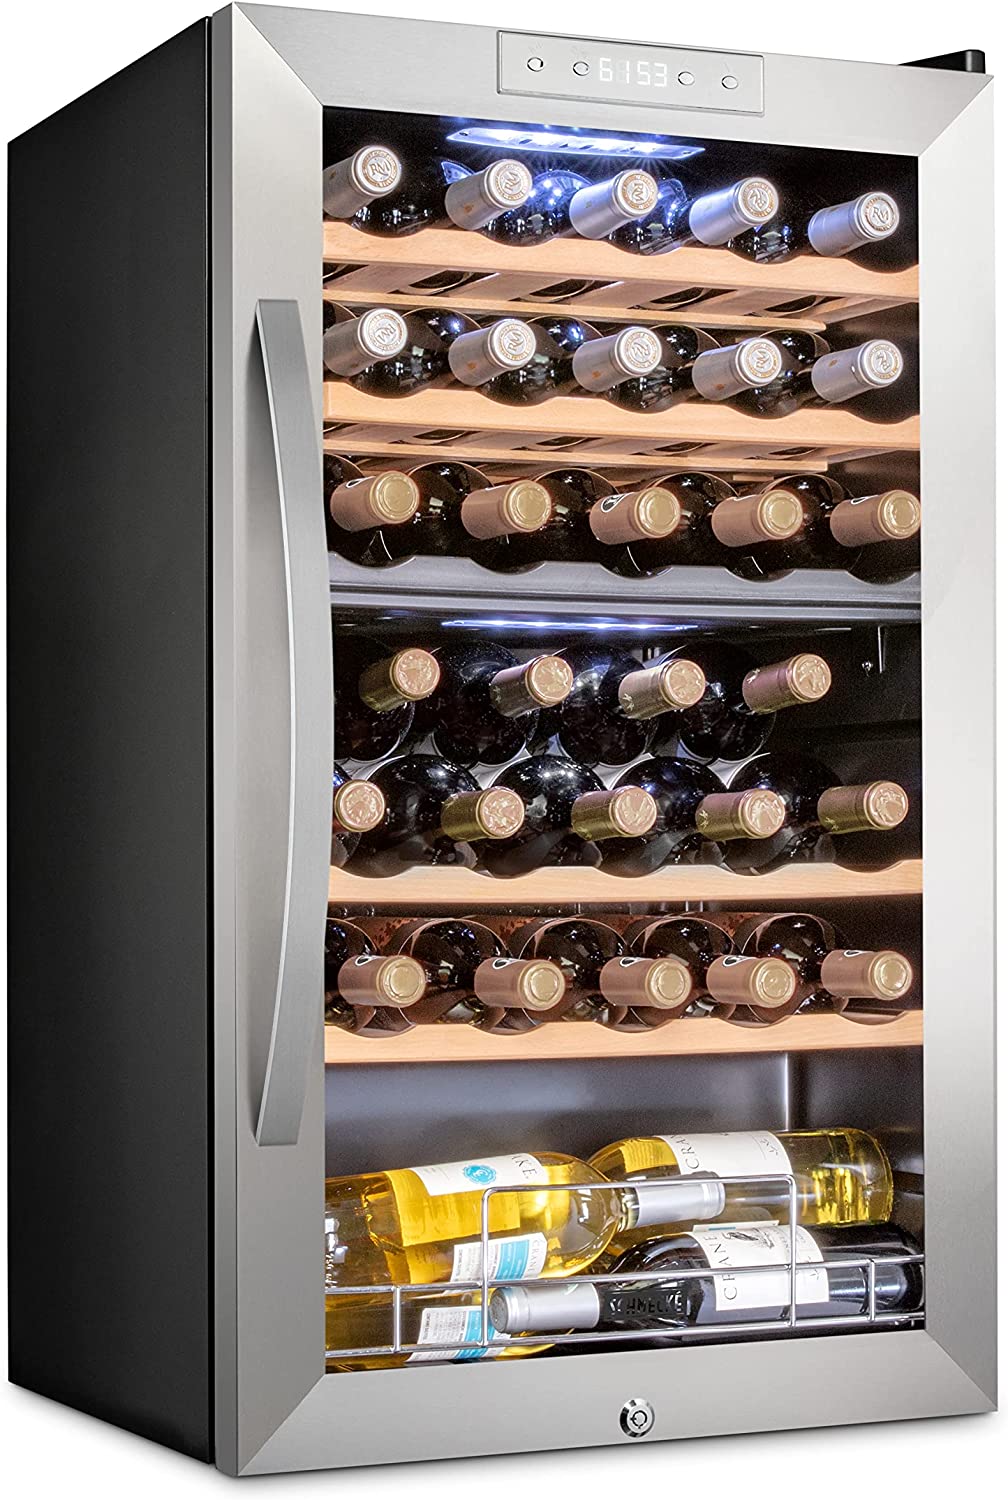 Galanz Built-In Wine Cooler, 47 Bottle - Stainless Steel